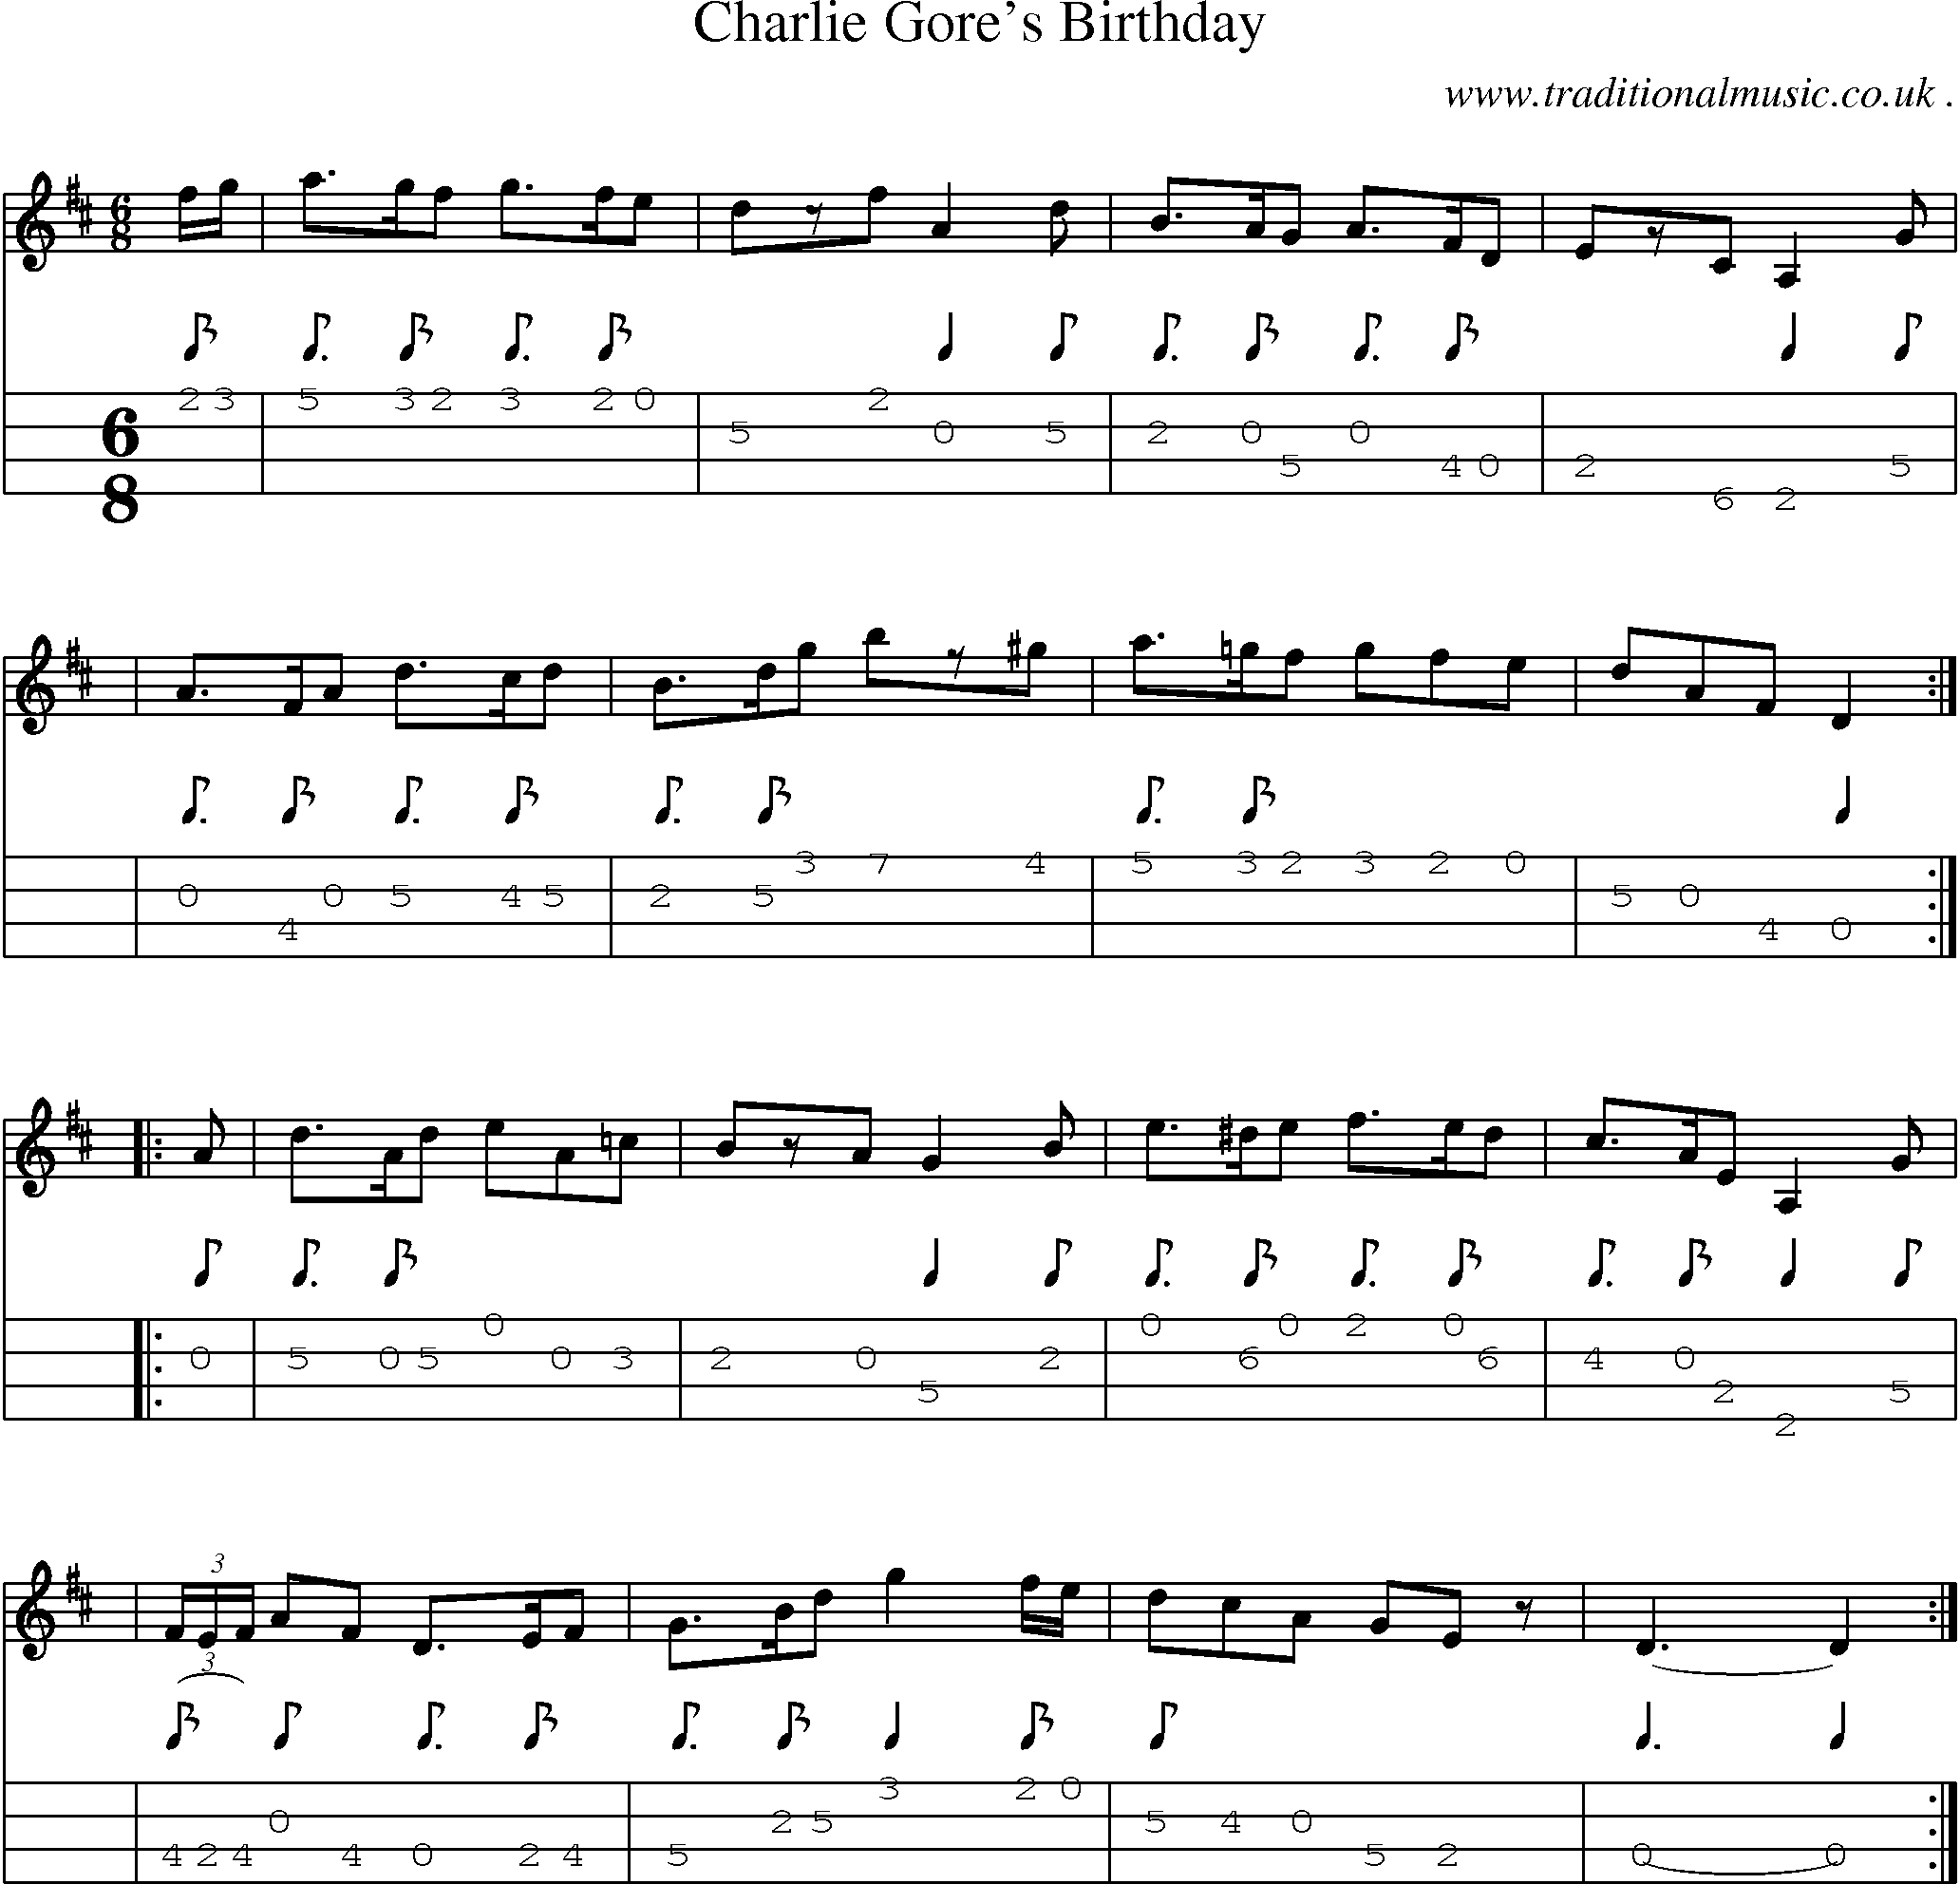 Sheet-music  score, Chords and Mandolin Tabs for Charlie Gores Birthday